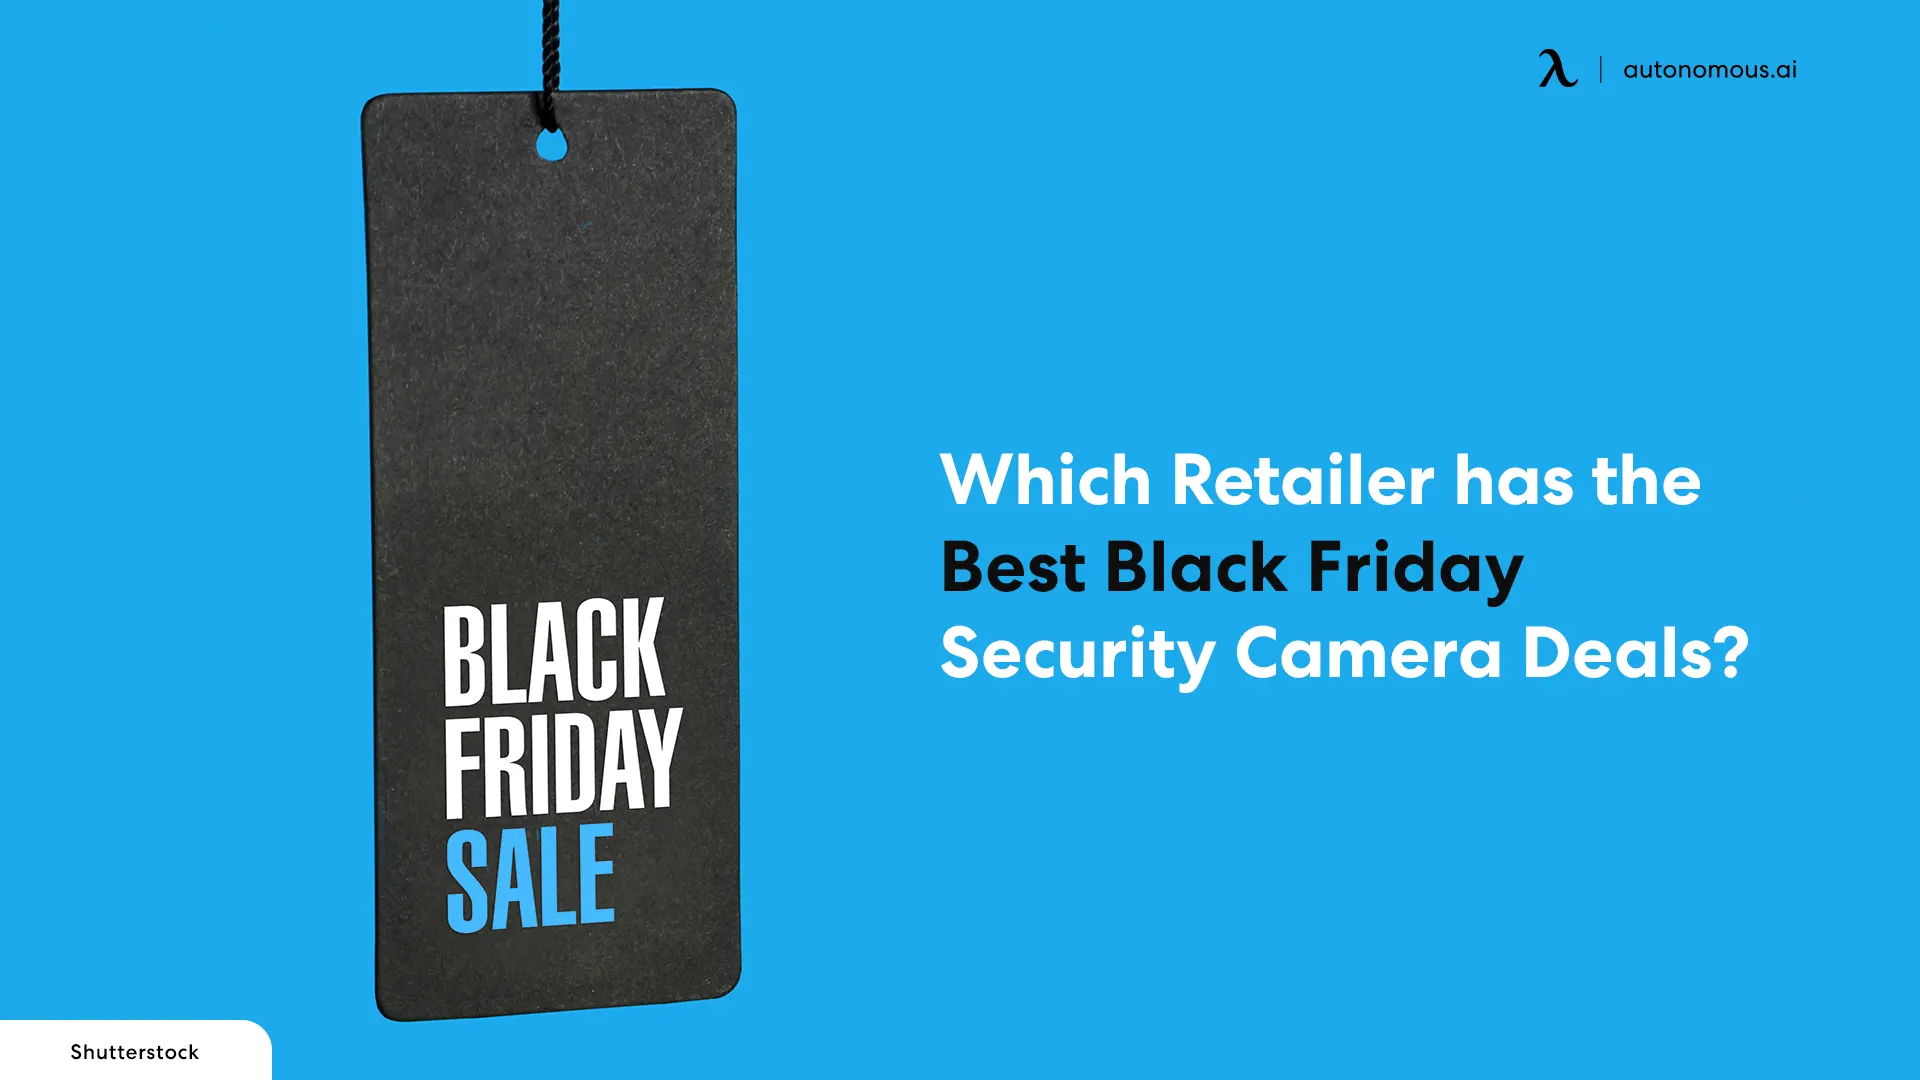 Which Retailer has the Best Black Friday Security Camera Deals?